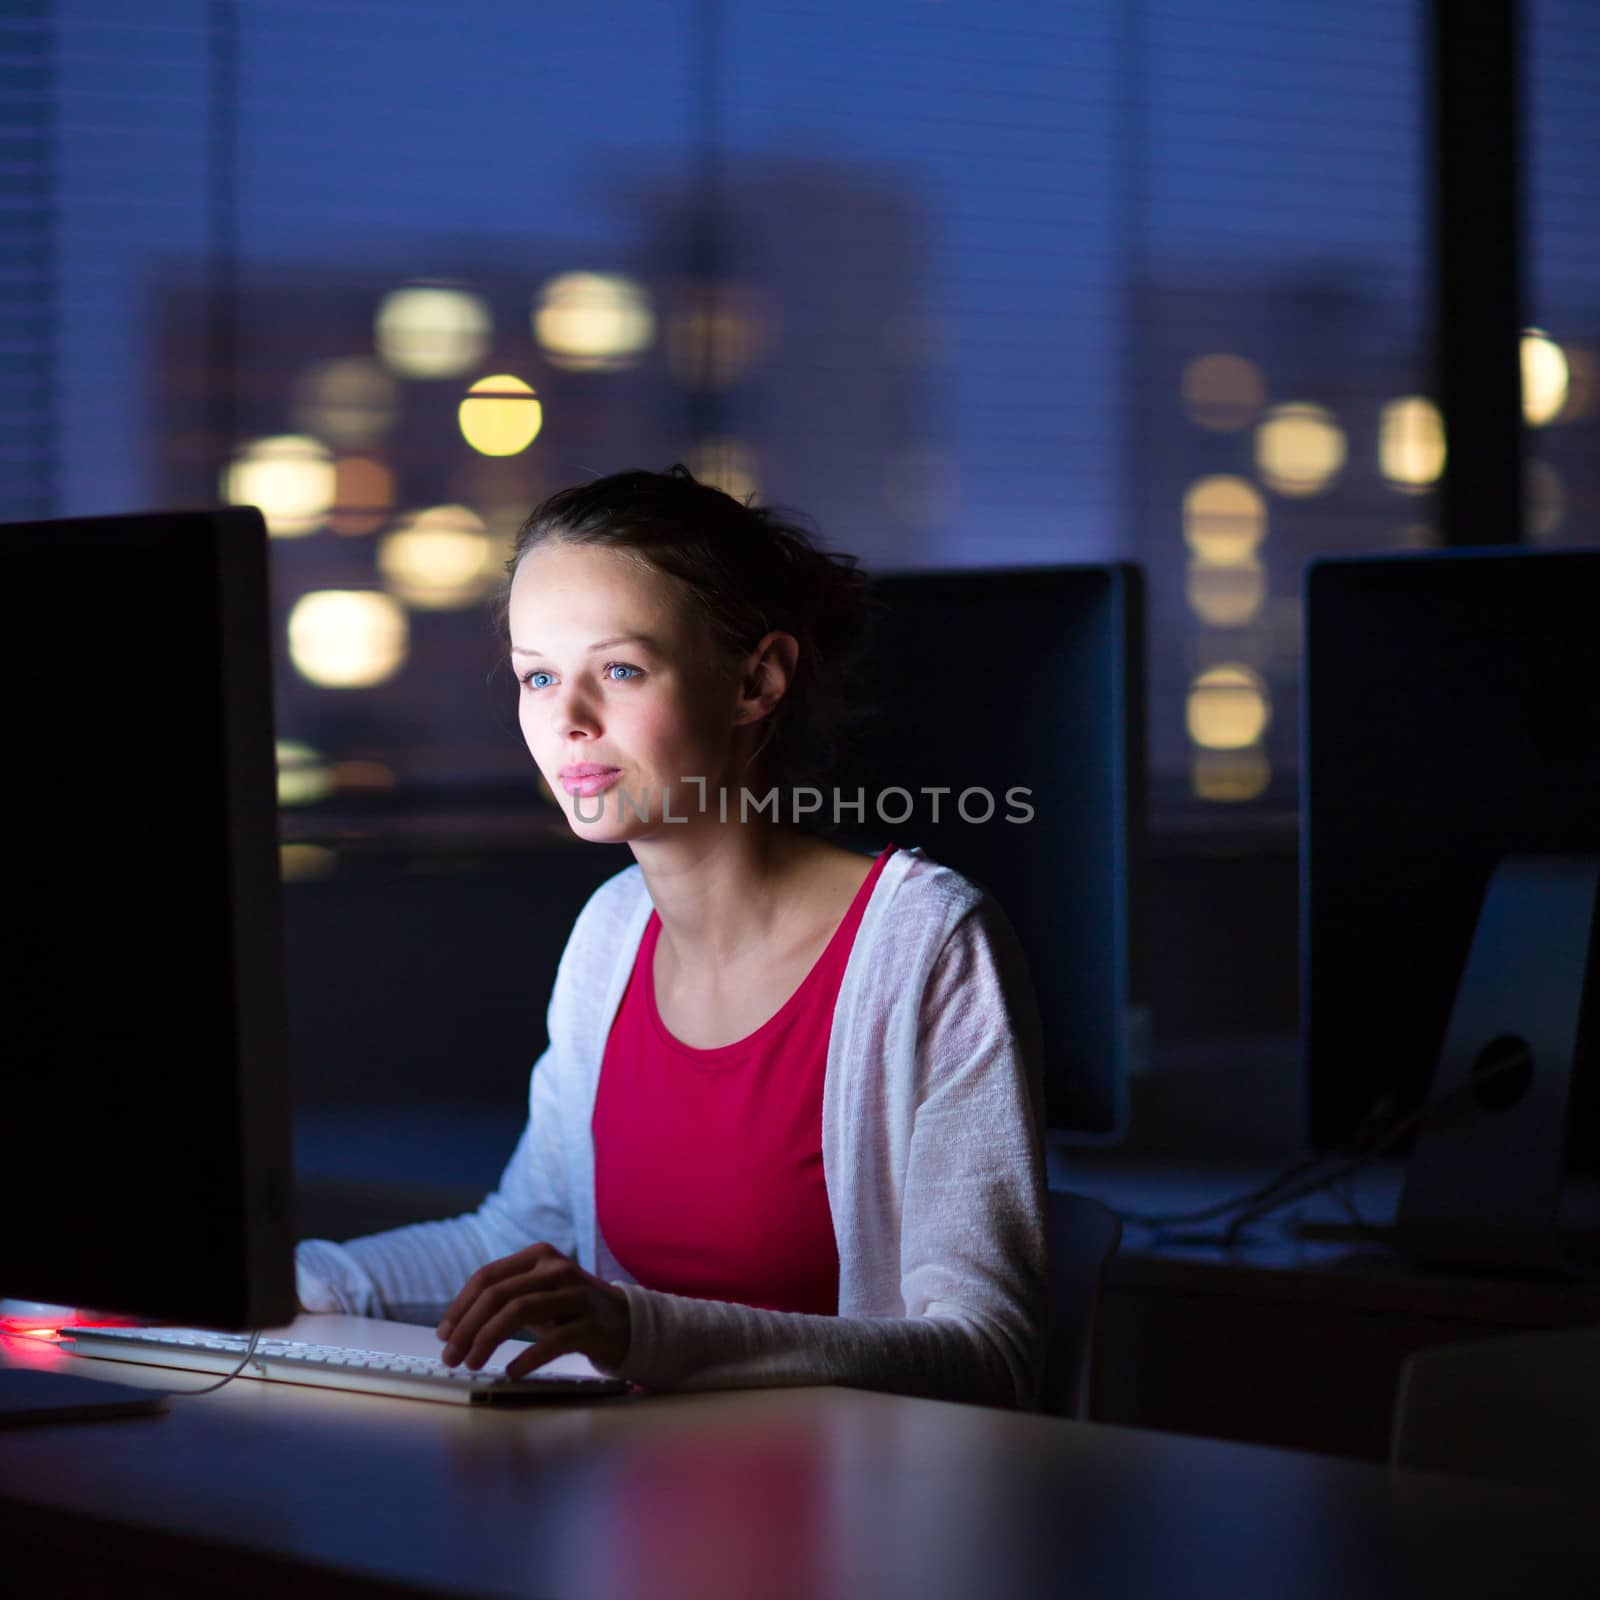 Pretty, young female college student using a desktop computer by viktor_cap